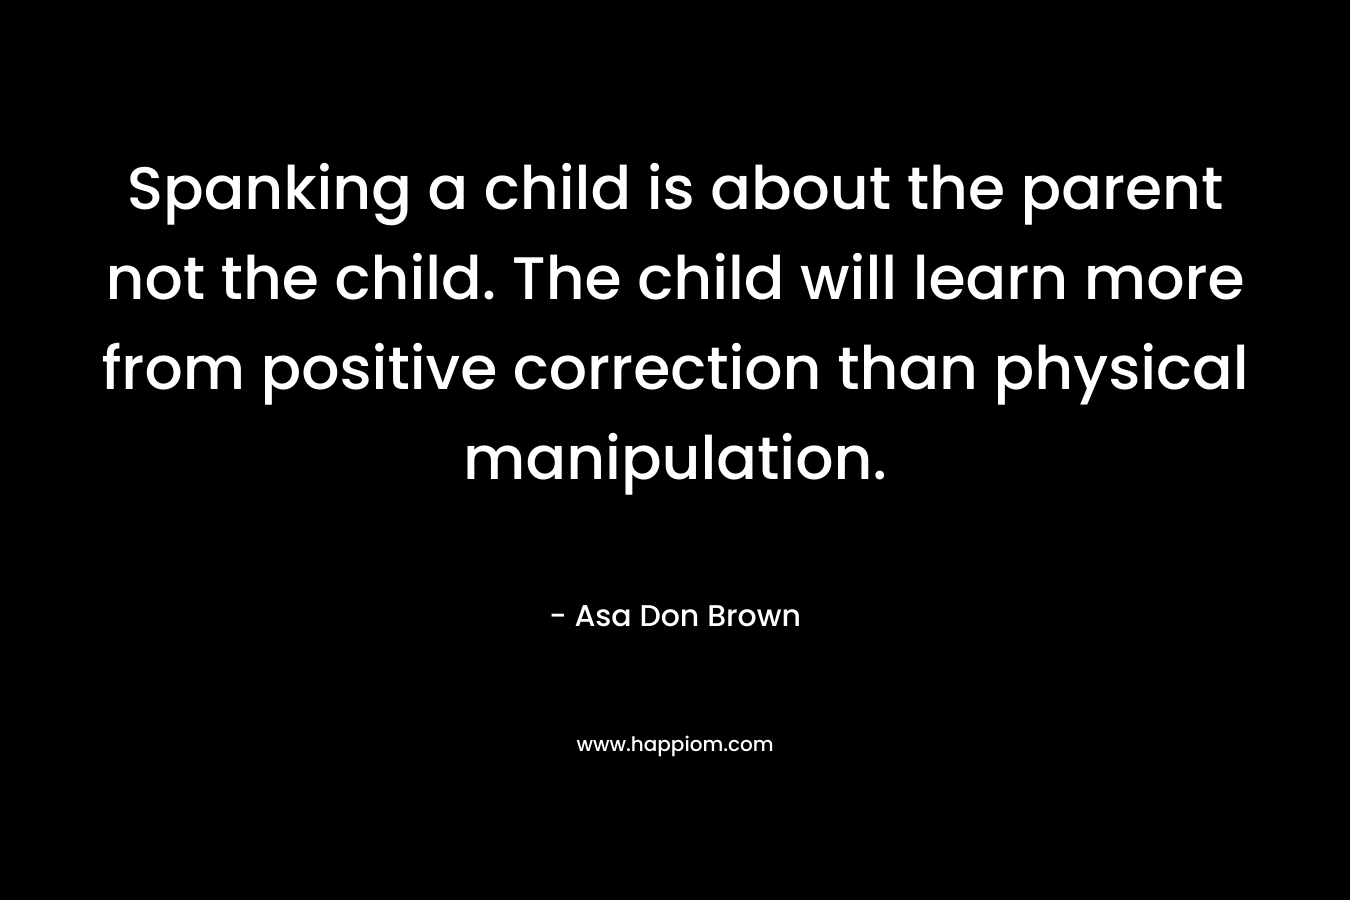 Spanking a child is about the parent not the child. The child will learn more from positive correction than physical manipulation.